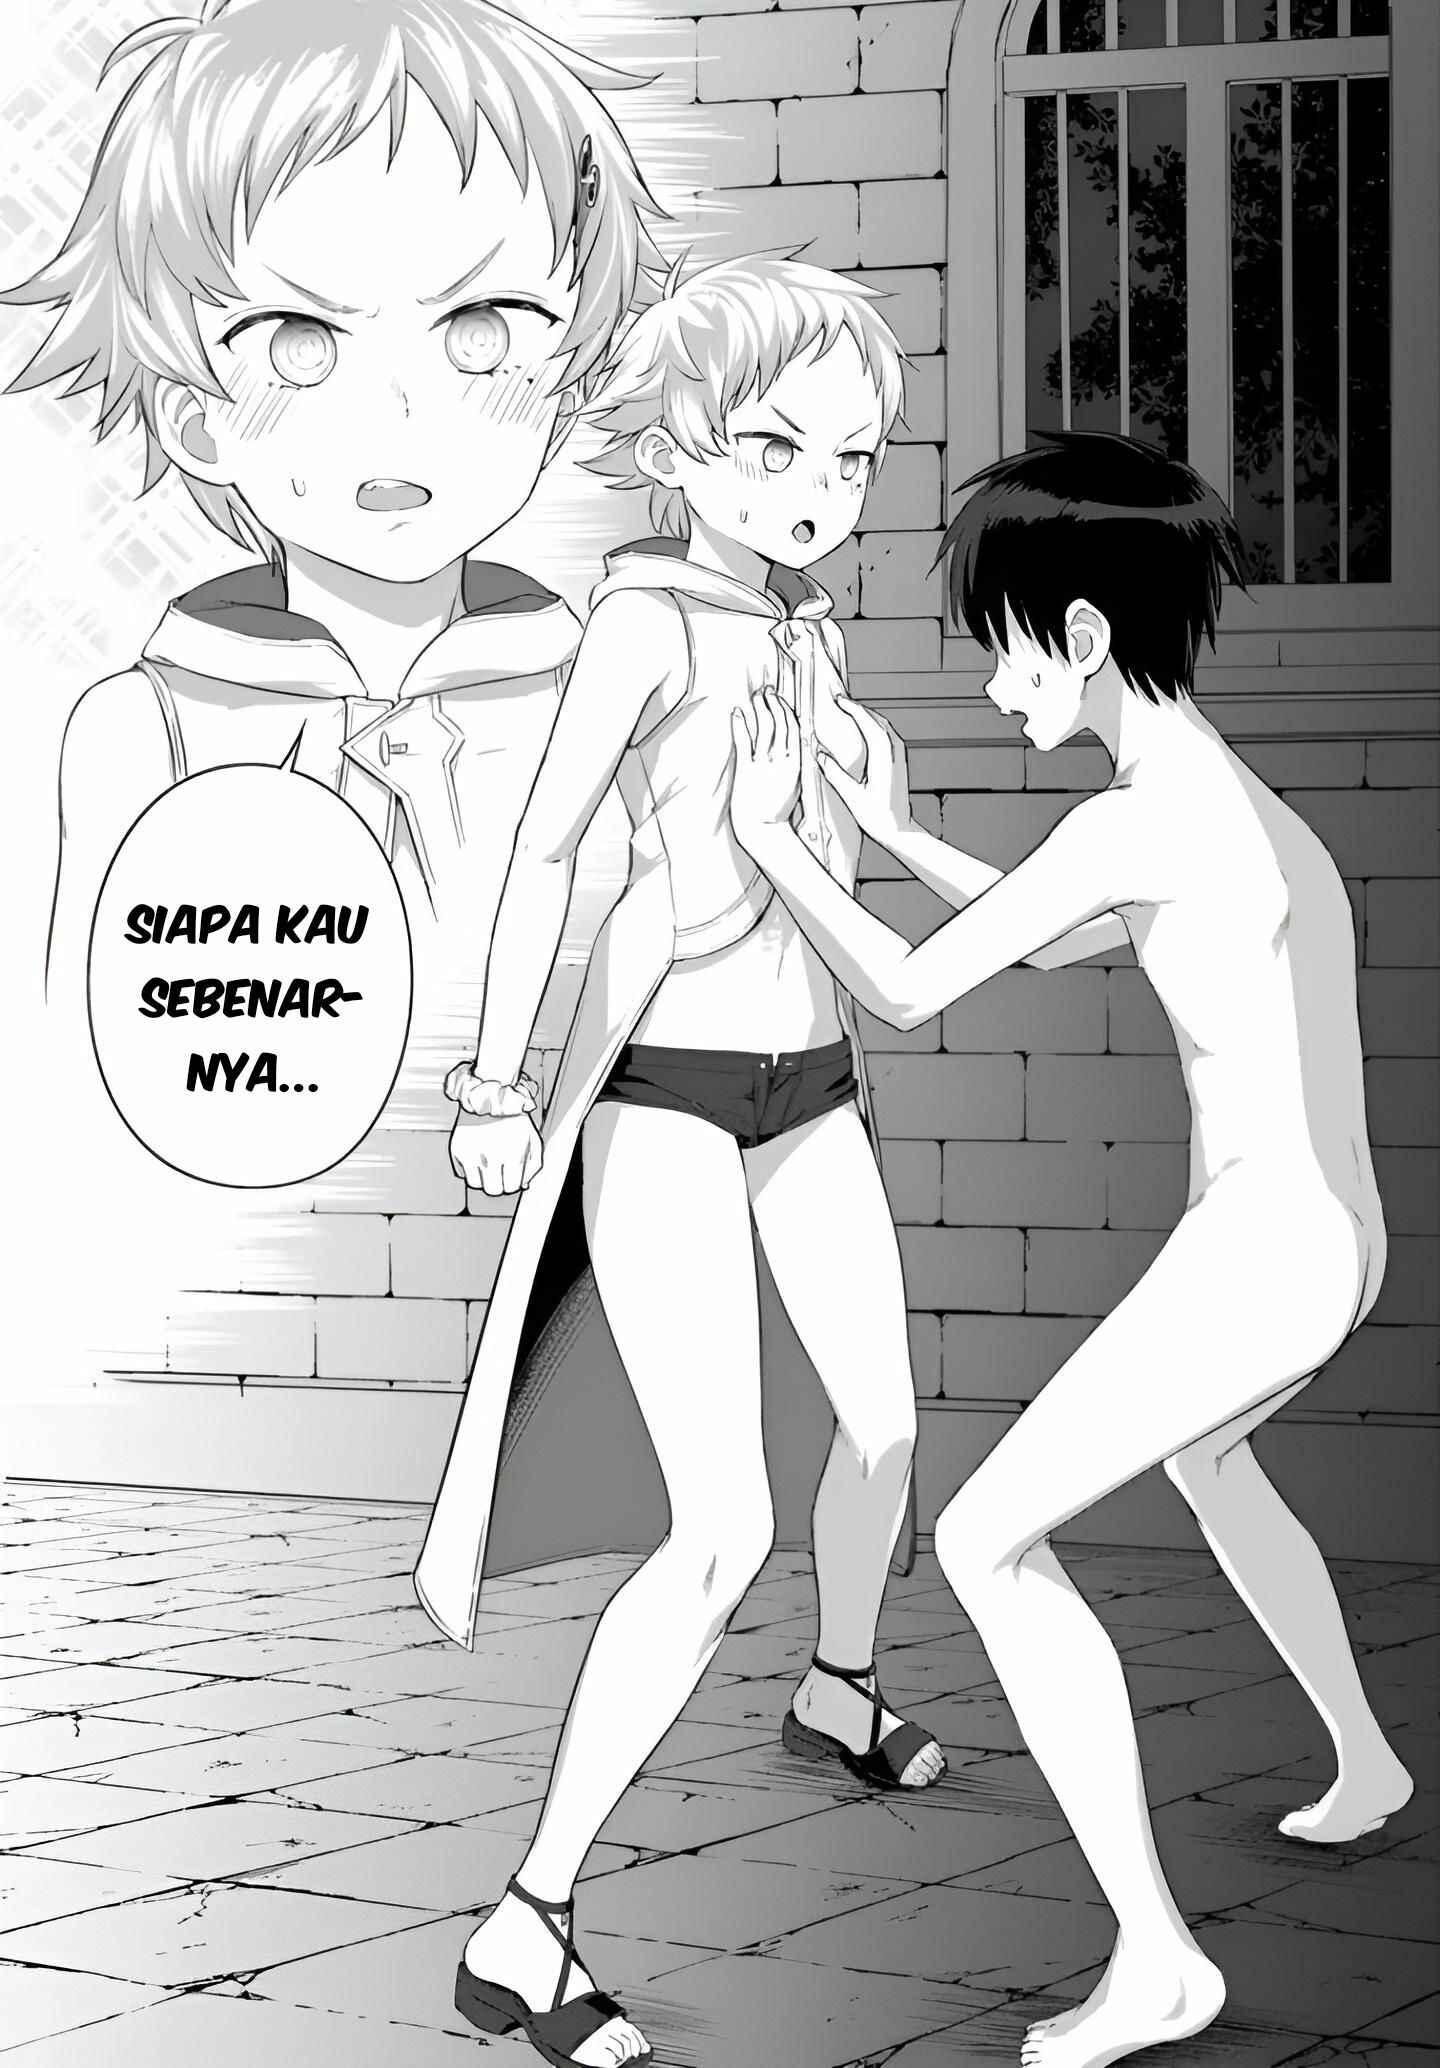 Valhalla Penis Mansion Chapter 19 Bahasa Indonesia